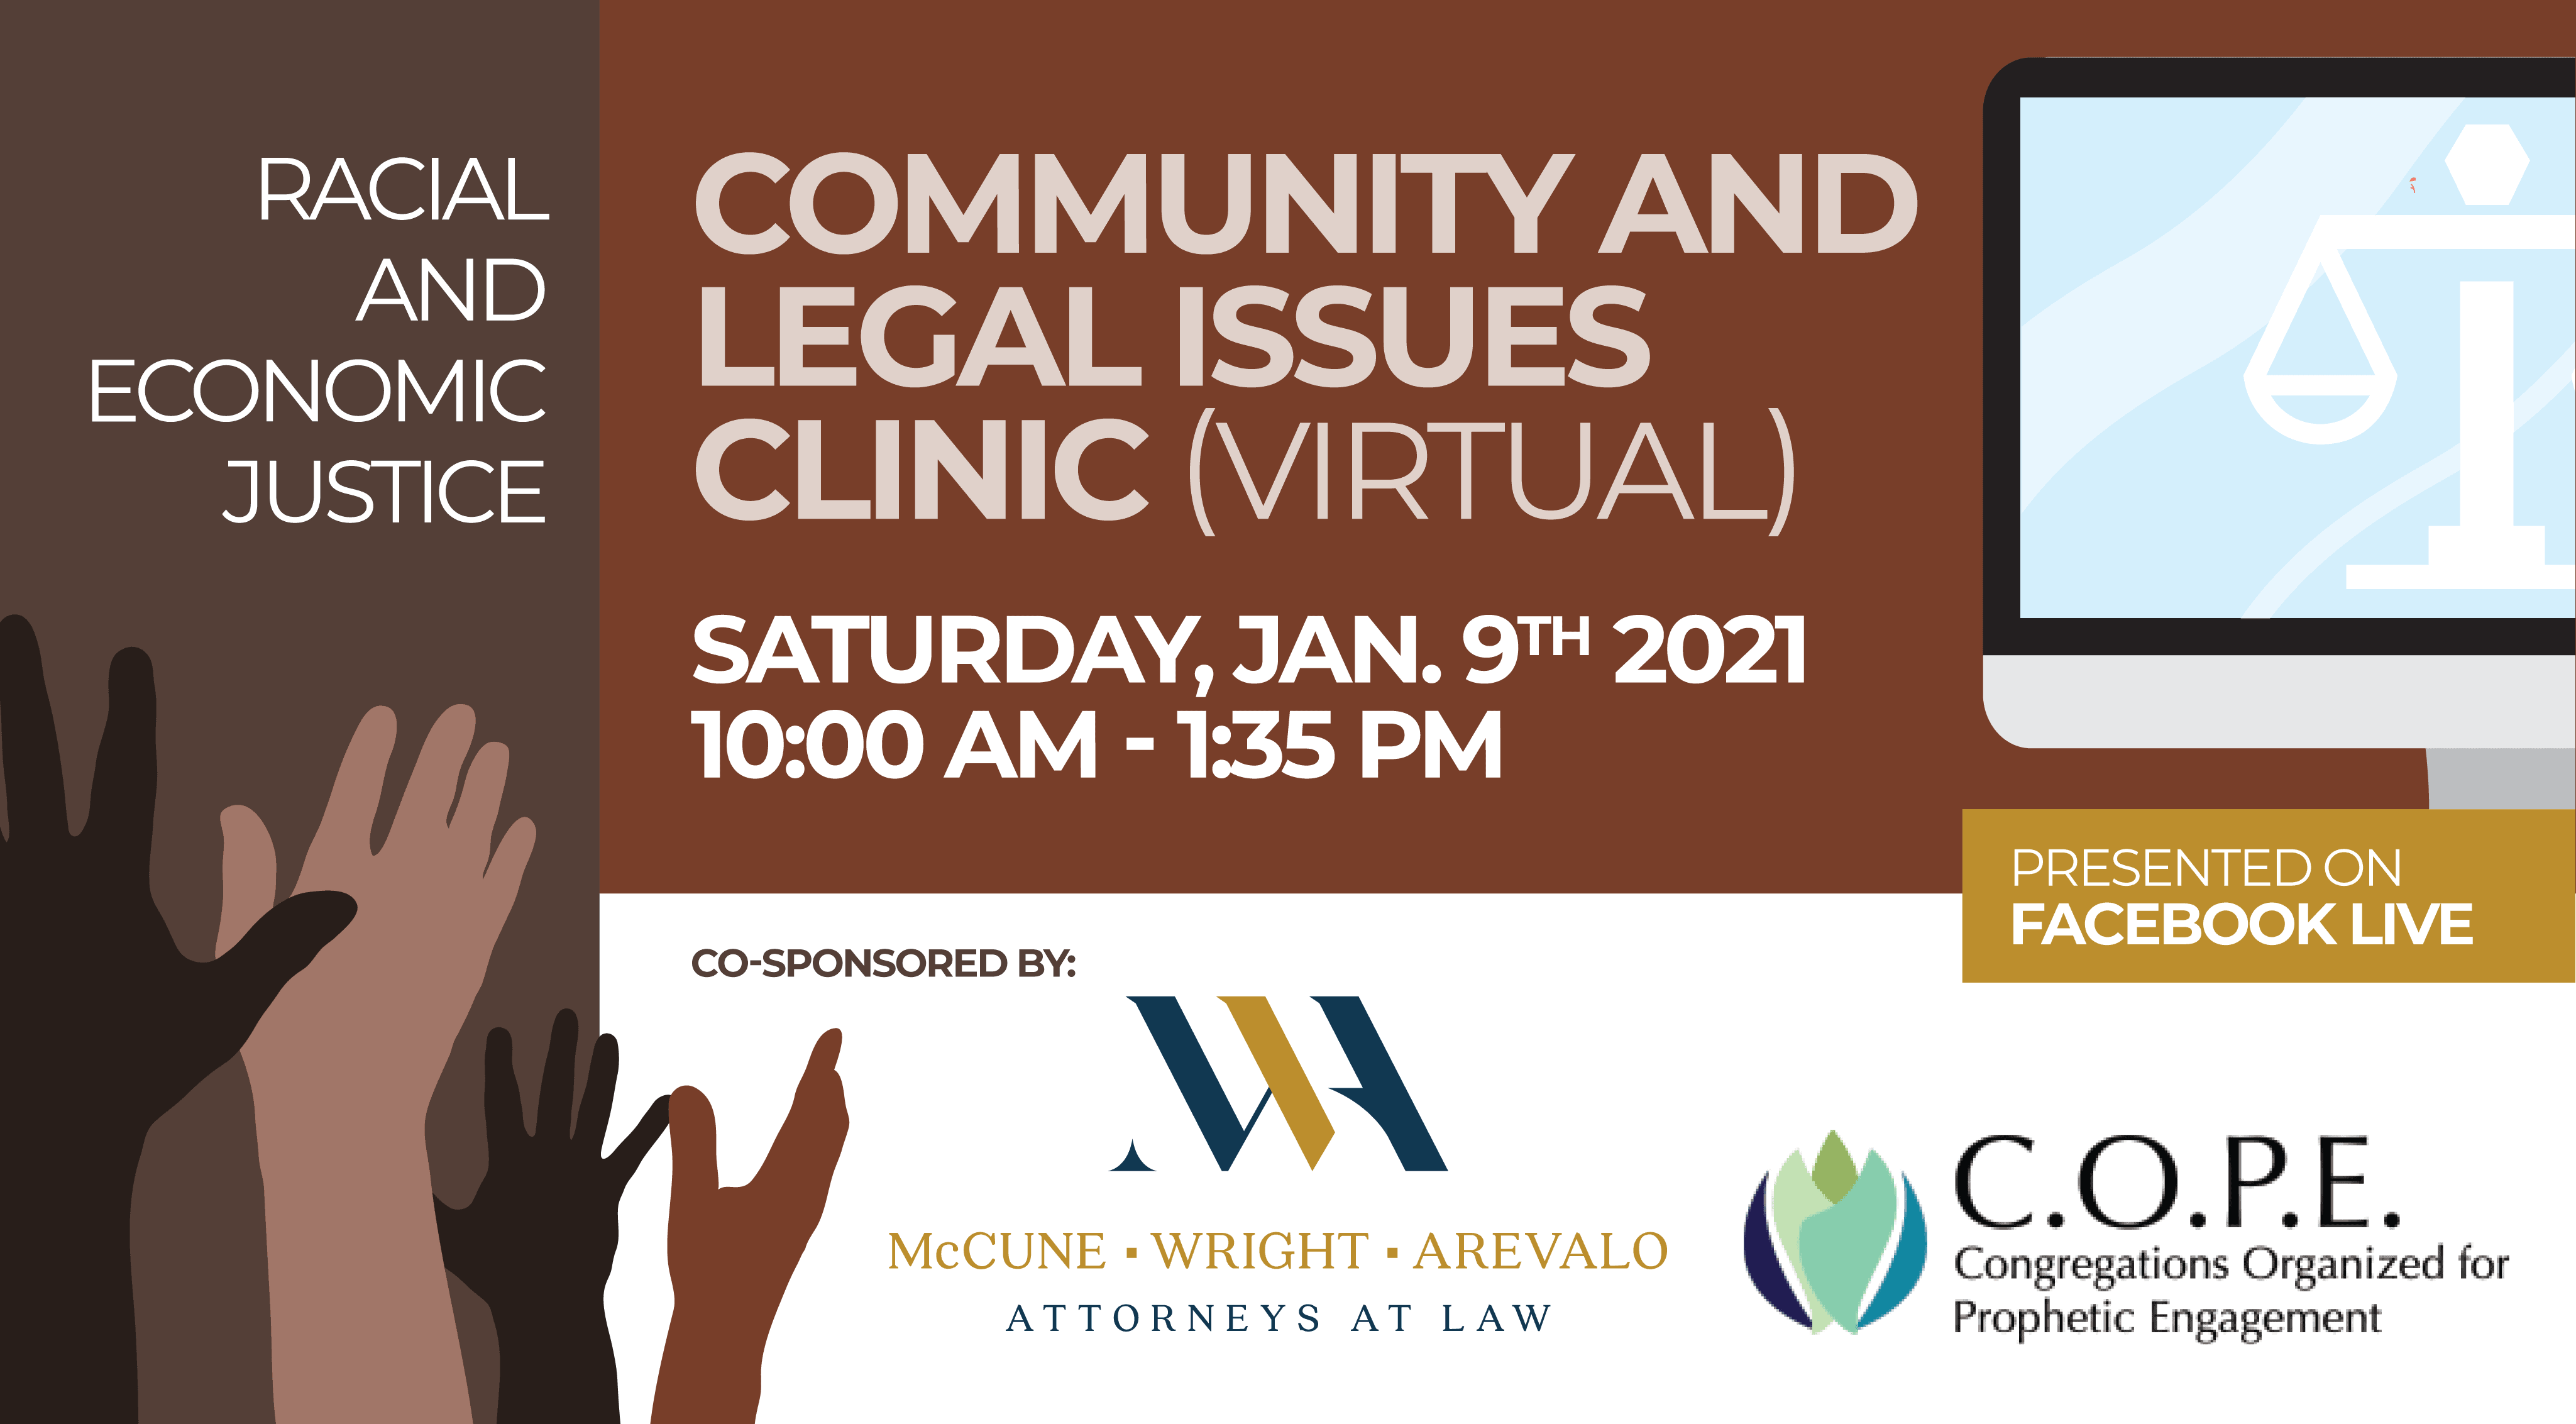 FREE virtual community and legal issues clinic